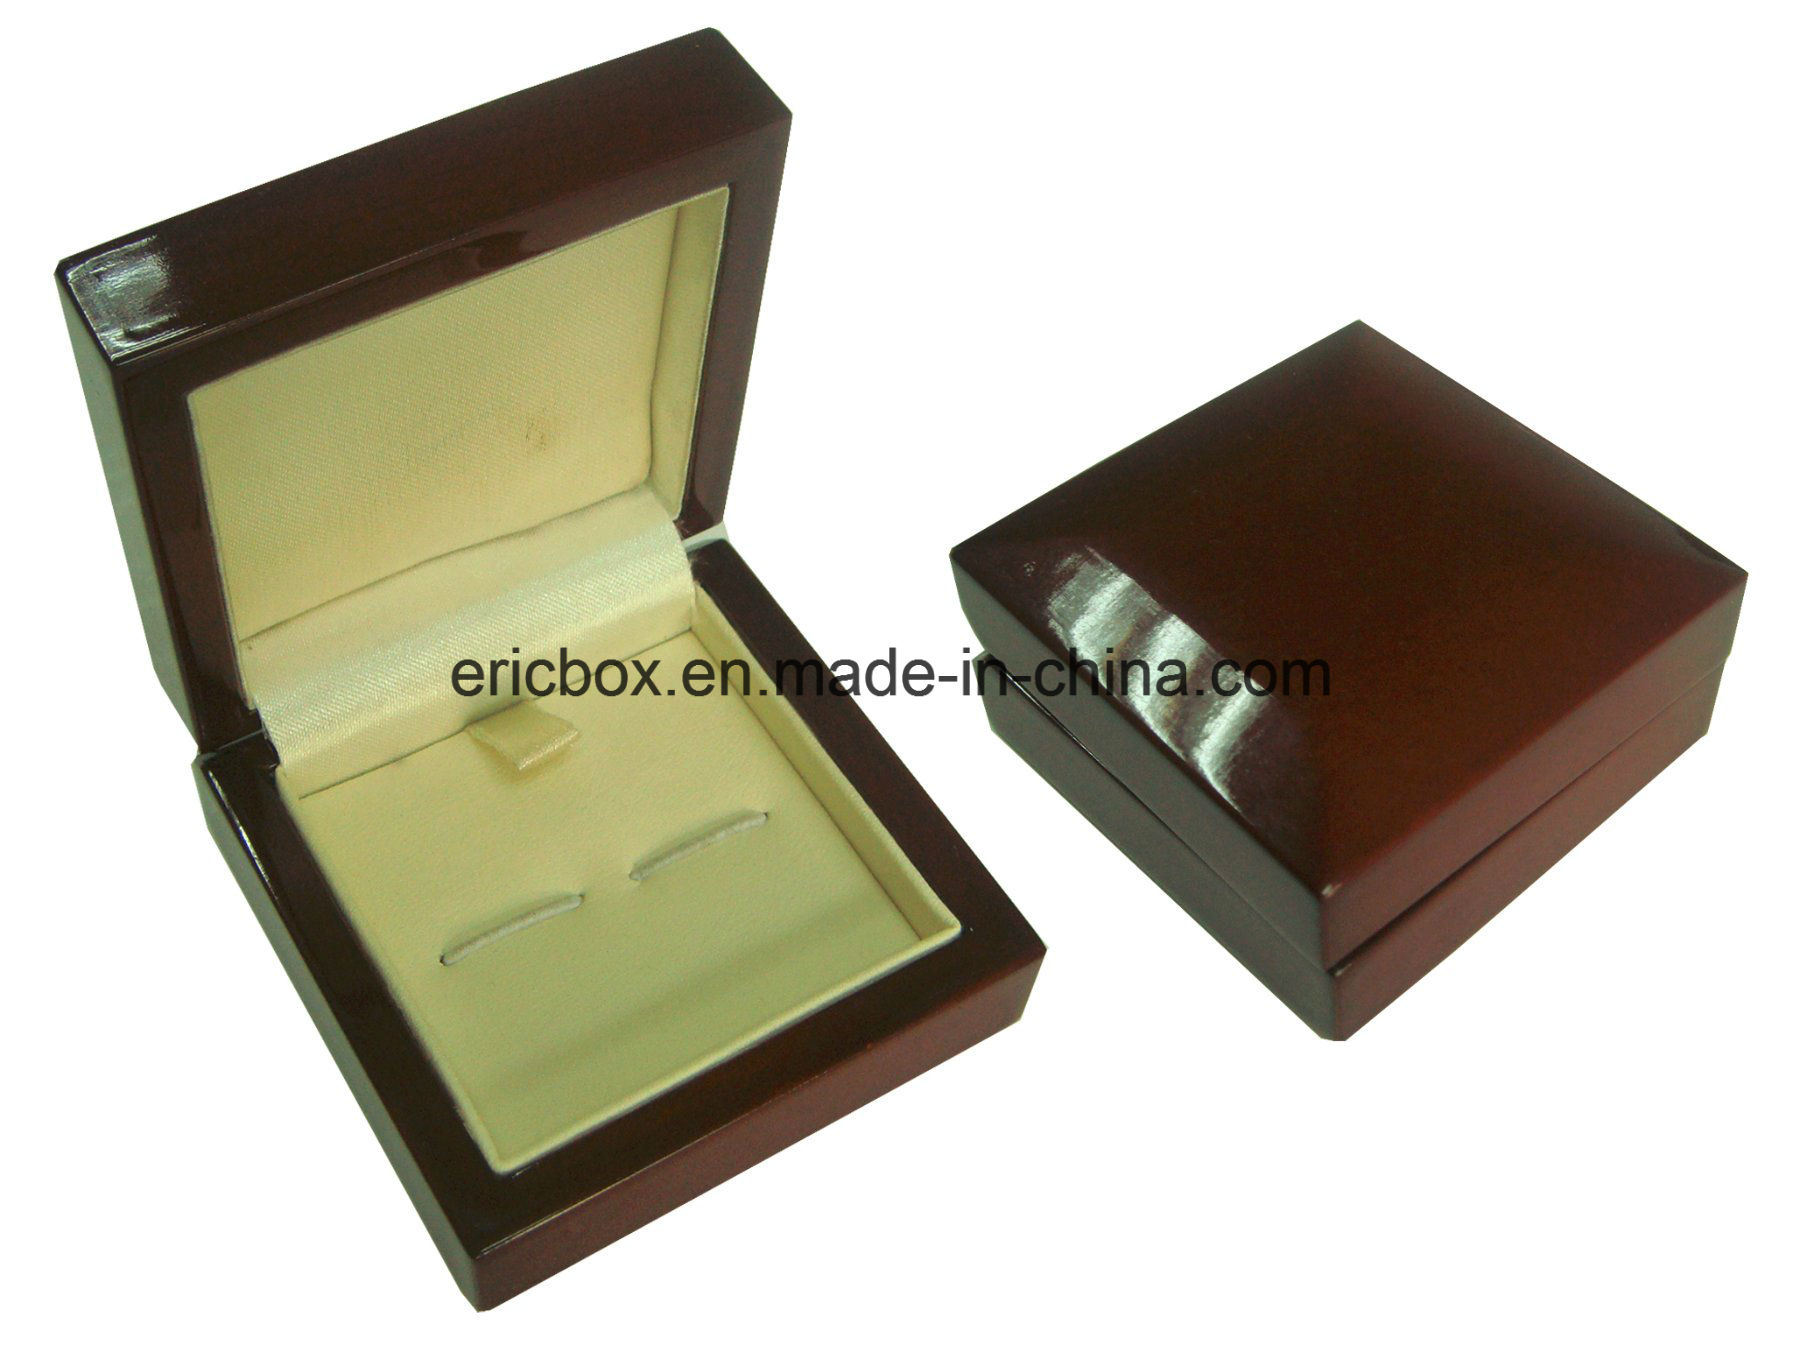 Jy-Cub17 Wooden Cardboard Paper Cufflink Storge Gift Jewelry Packing Box